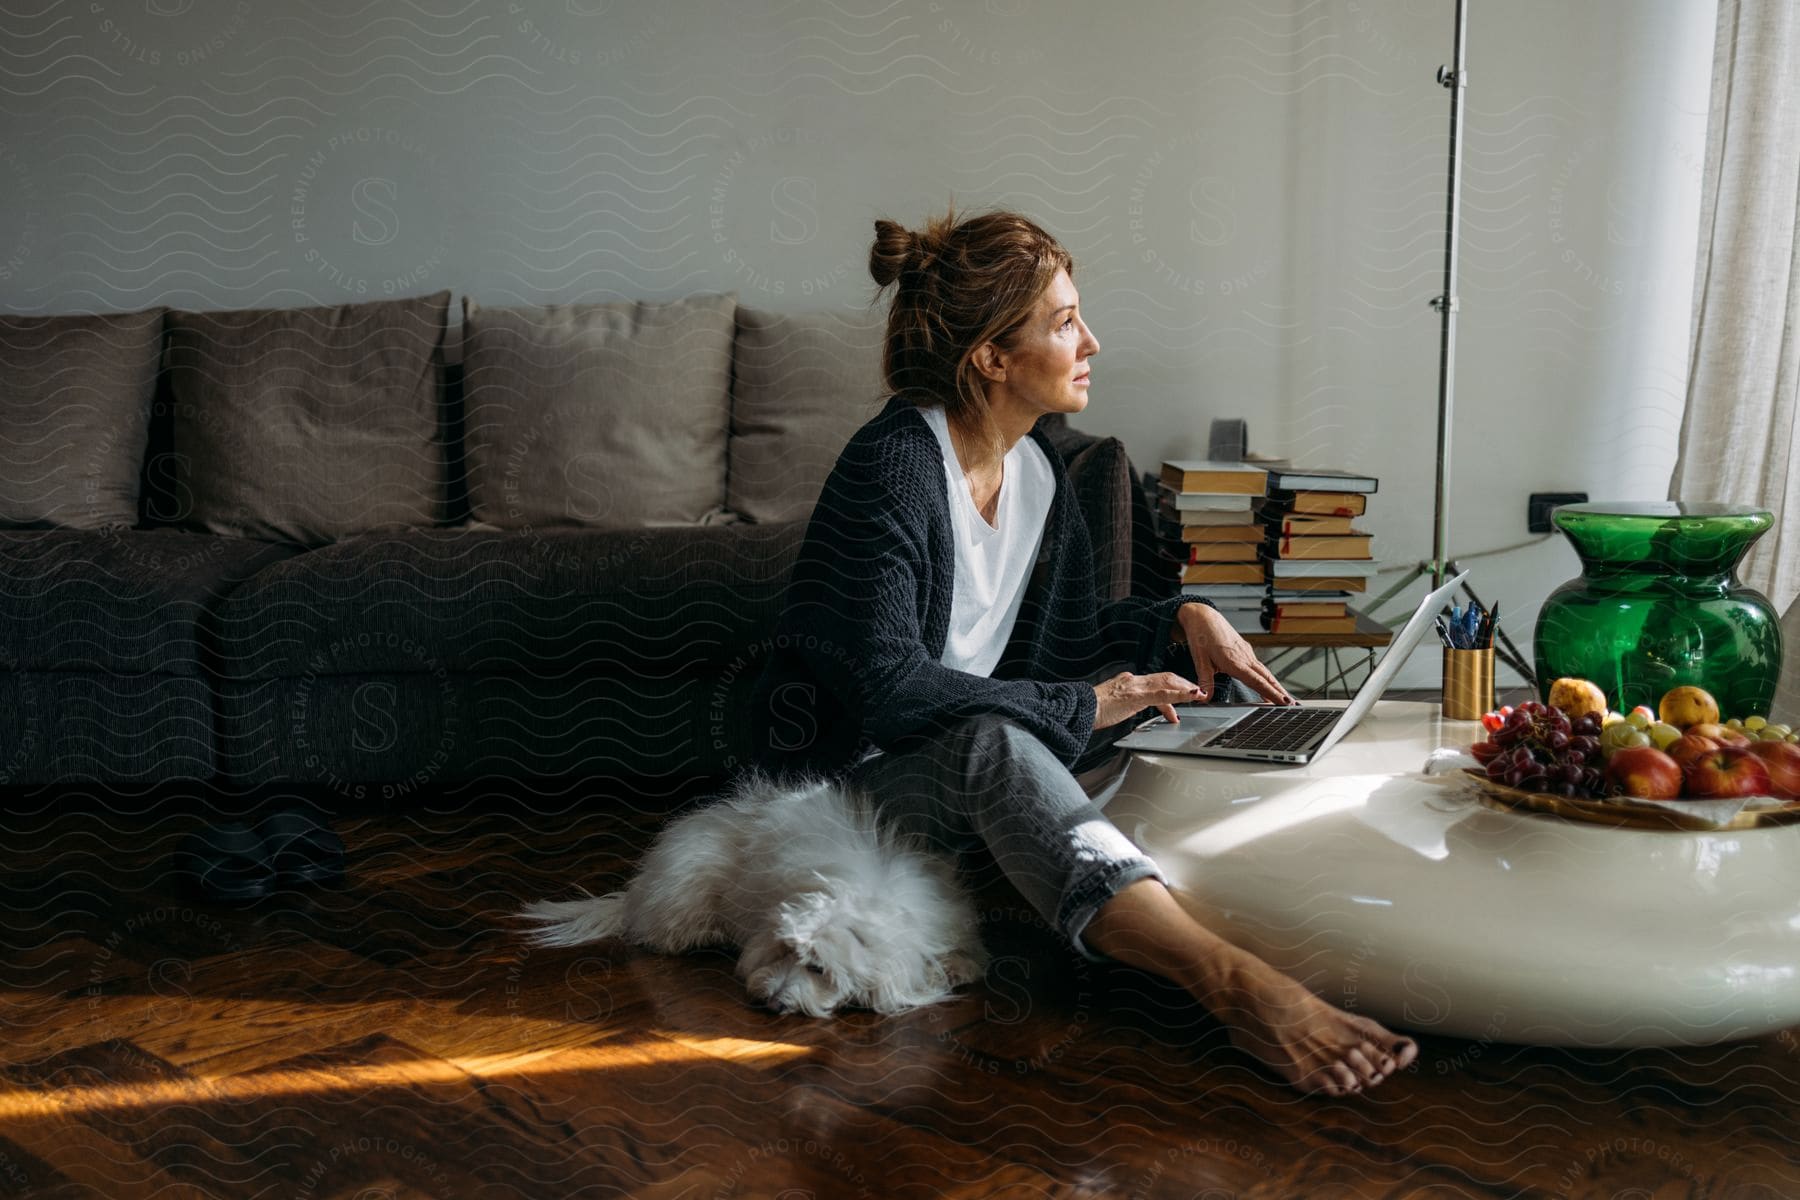 A white woman sits on the floor in her sunlit living room during the day. Her laptop rests on a white round marble table adorned with fresh fruits. A white Lhasa Apso dog lounges nearby, and a couch stands behind her.